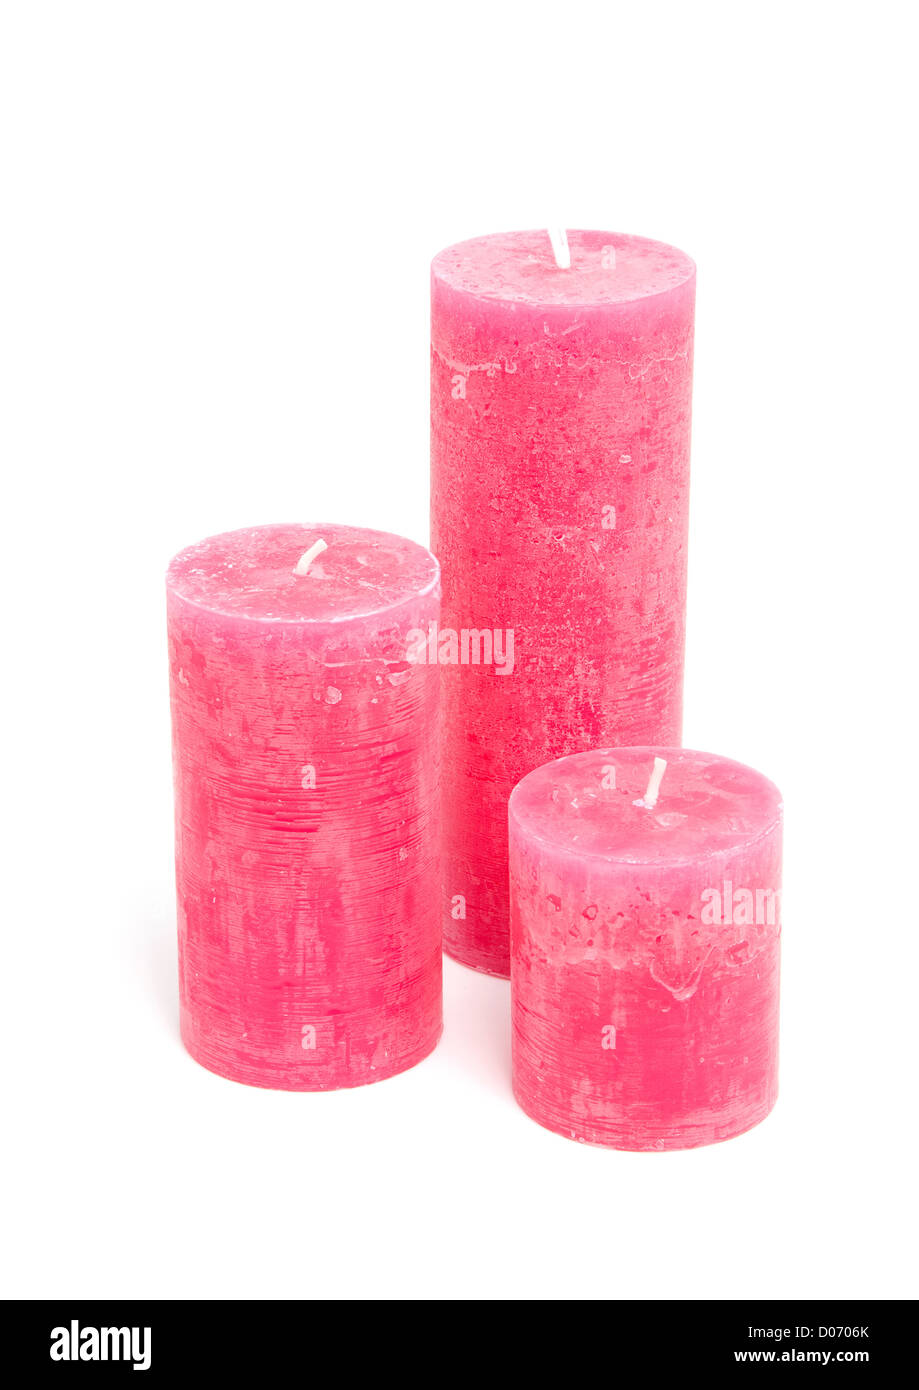 Three pink candles isolated on white background Stock Photo